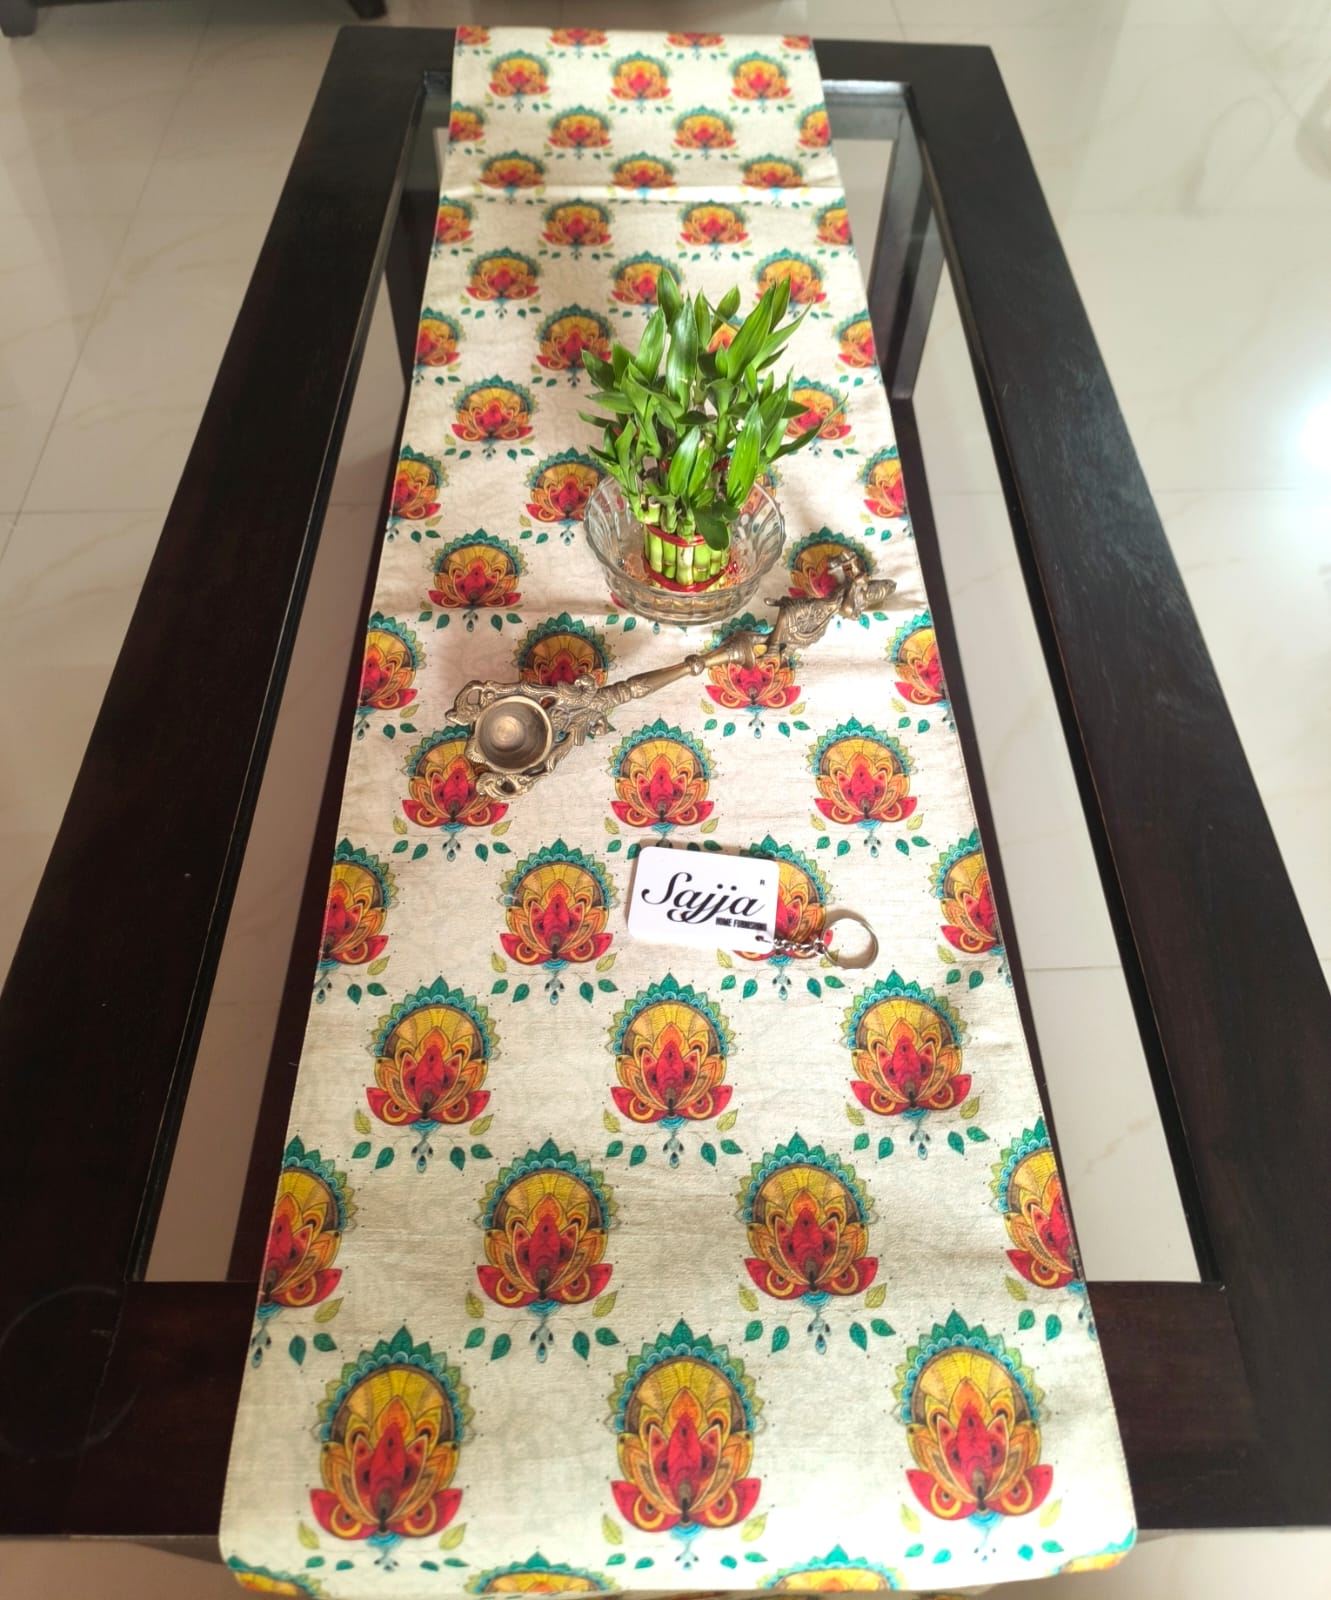 Buddha Lotus Art Inspired Silk Dining Table Runner 6 seater  Side Table Runners Gift L-72 in, W-12in)